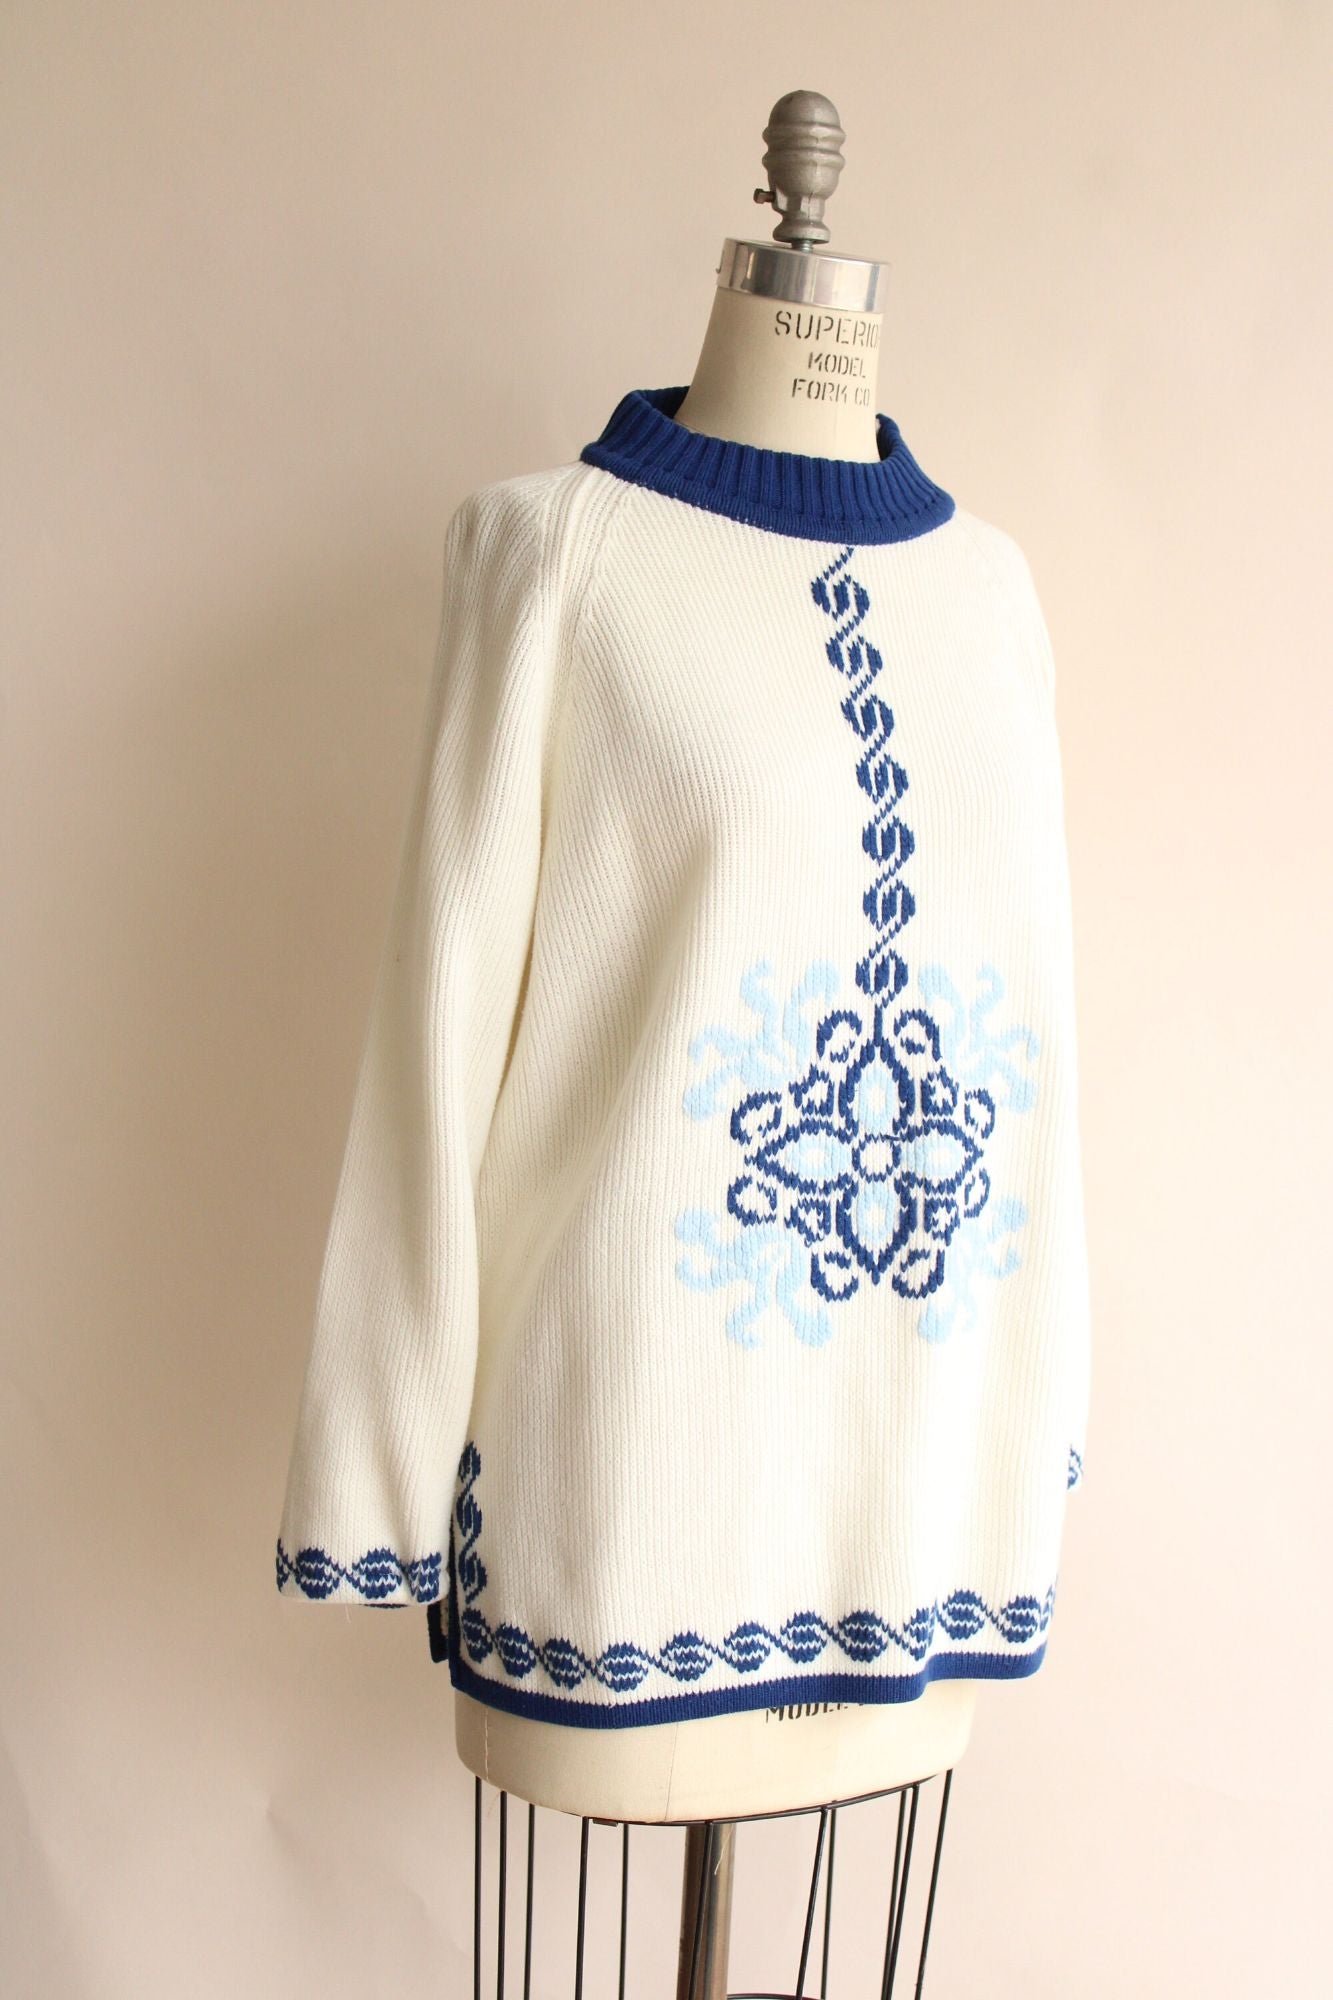 Vintage 1970s The Campus Shop Nordic Style Blue and White Jumper